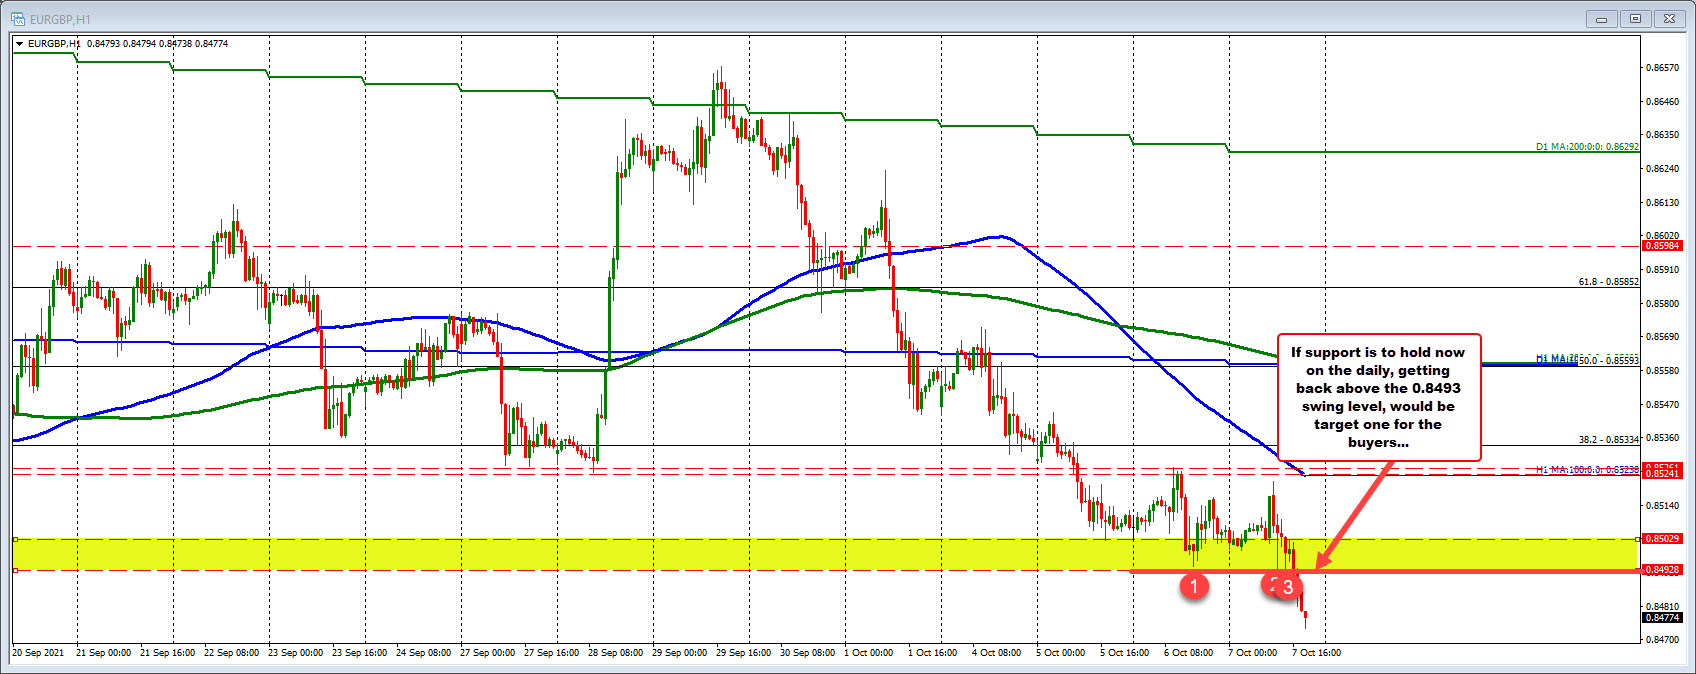 EURGBP on the hourly chart